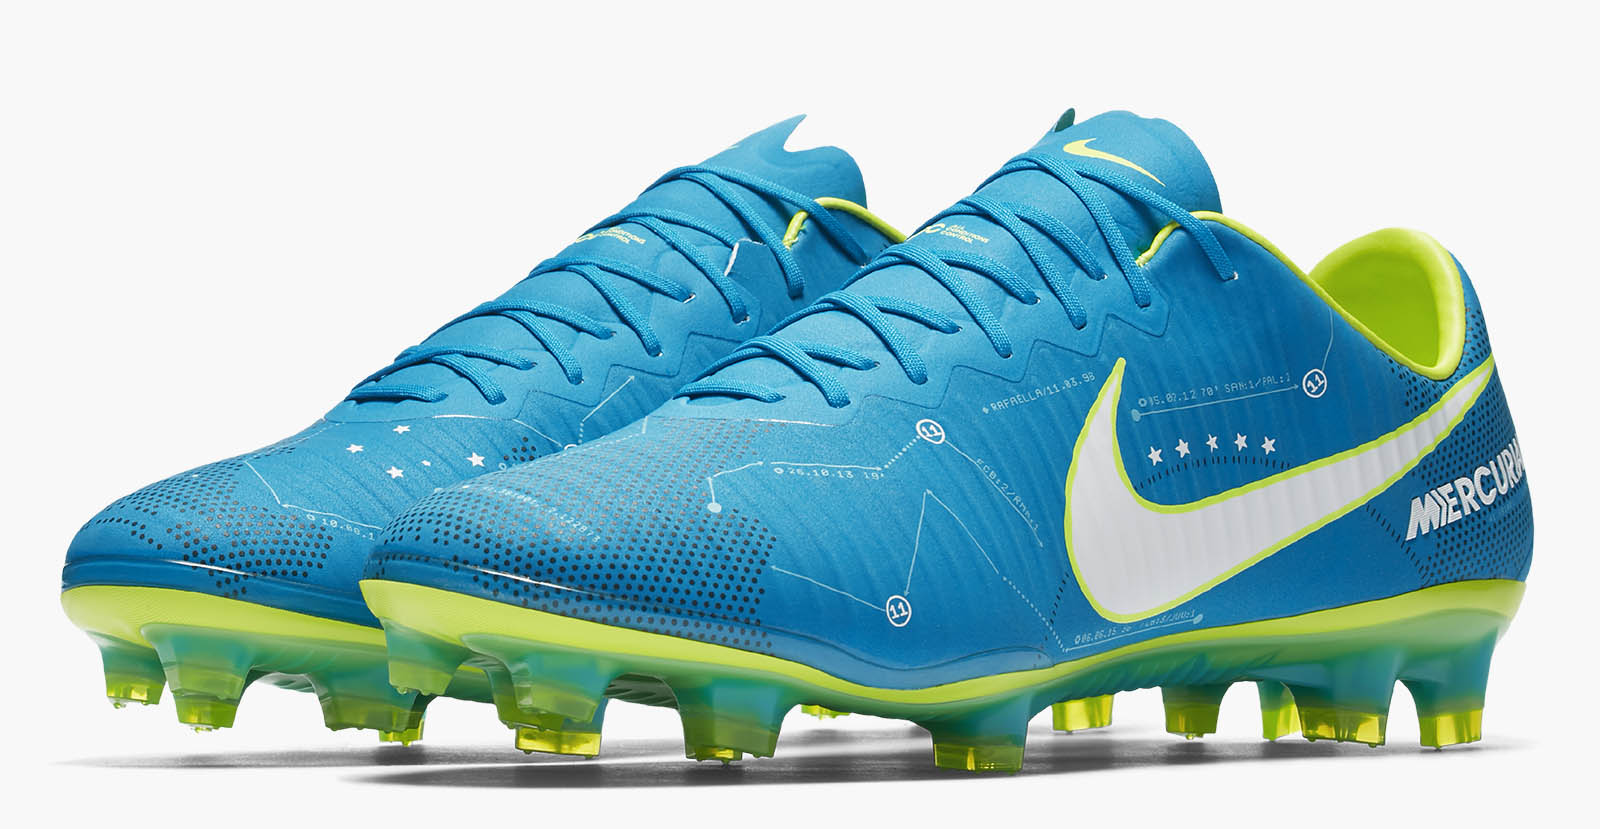 First-Ever - Nike Mercurial Vapor XI Neymar In The 2017 Boots Revealed - Footy Headlines